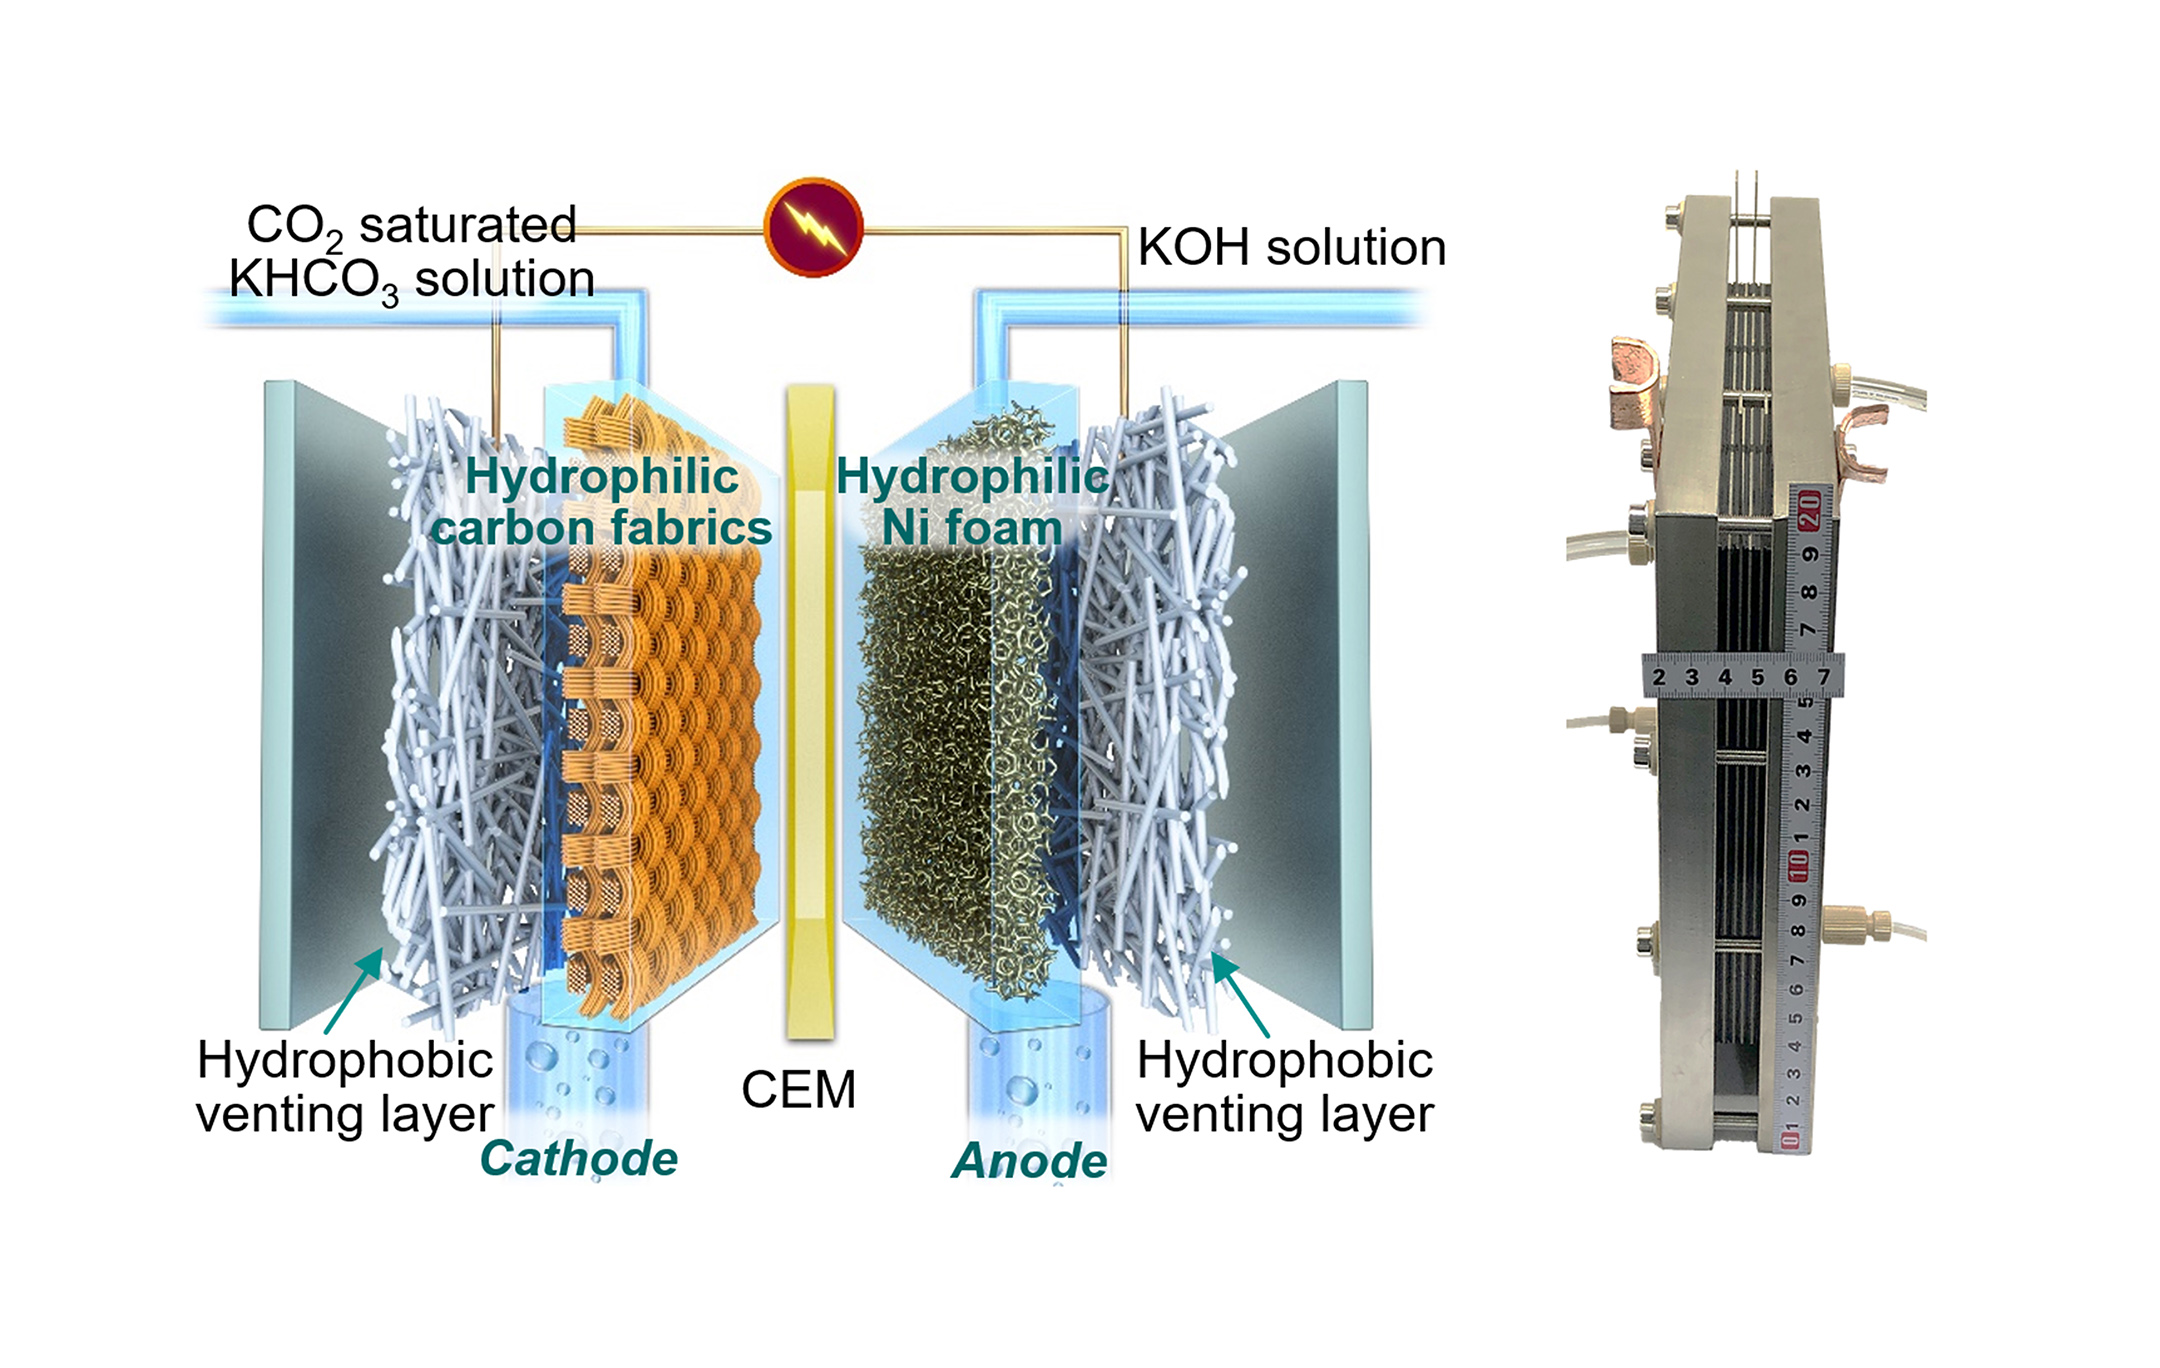 a schematic showing the key components of the reactor and working mechanism and a picture of the CO2 stack, which is a demonstration of the commercial reactors